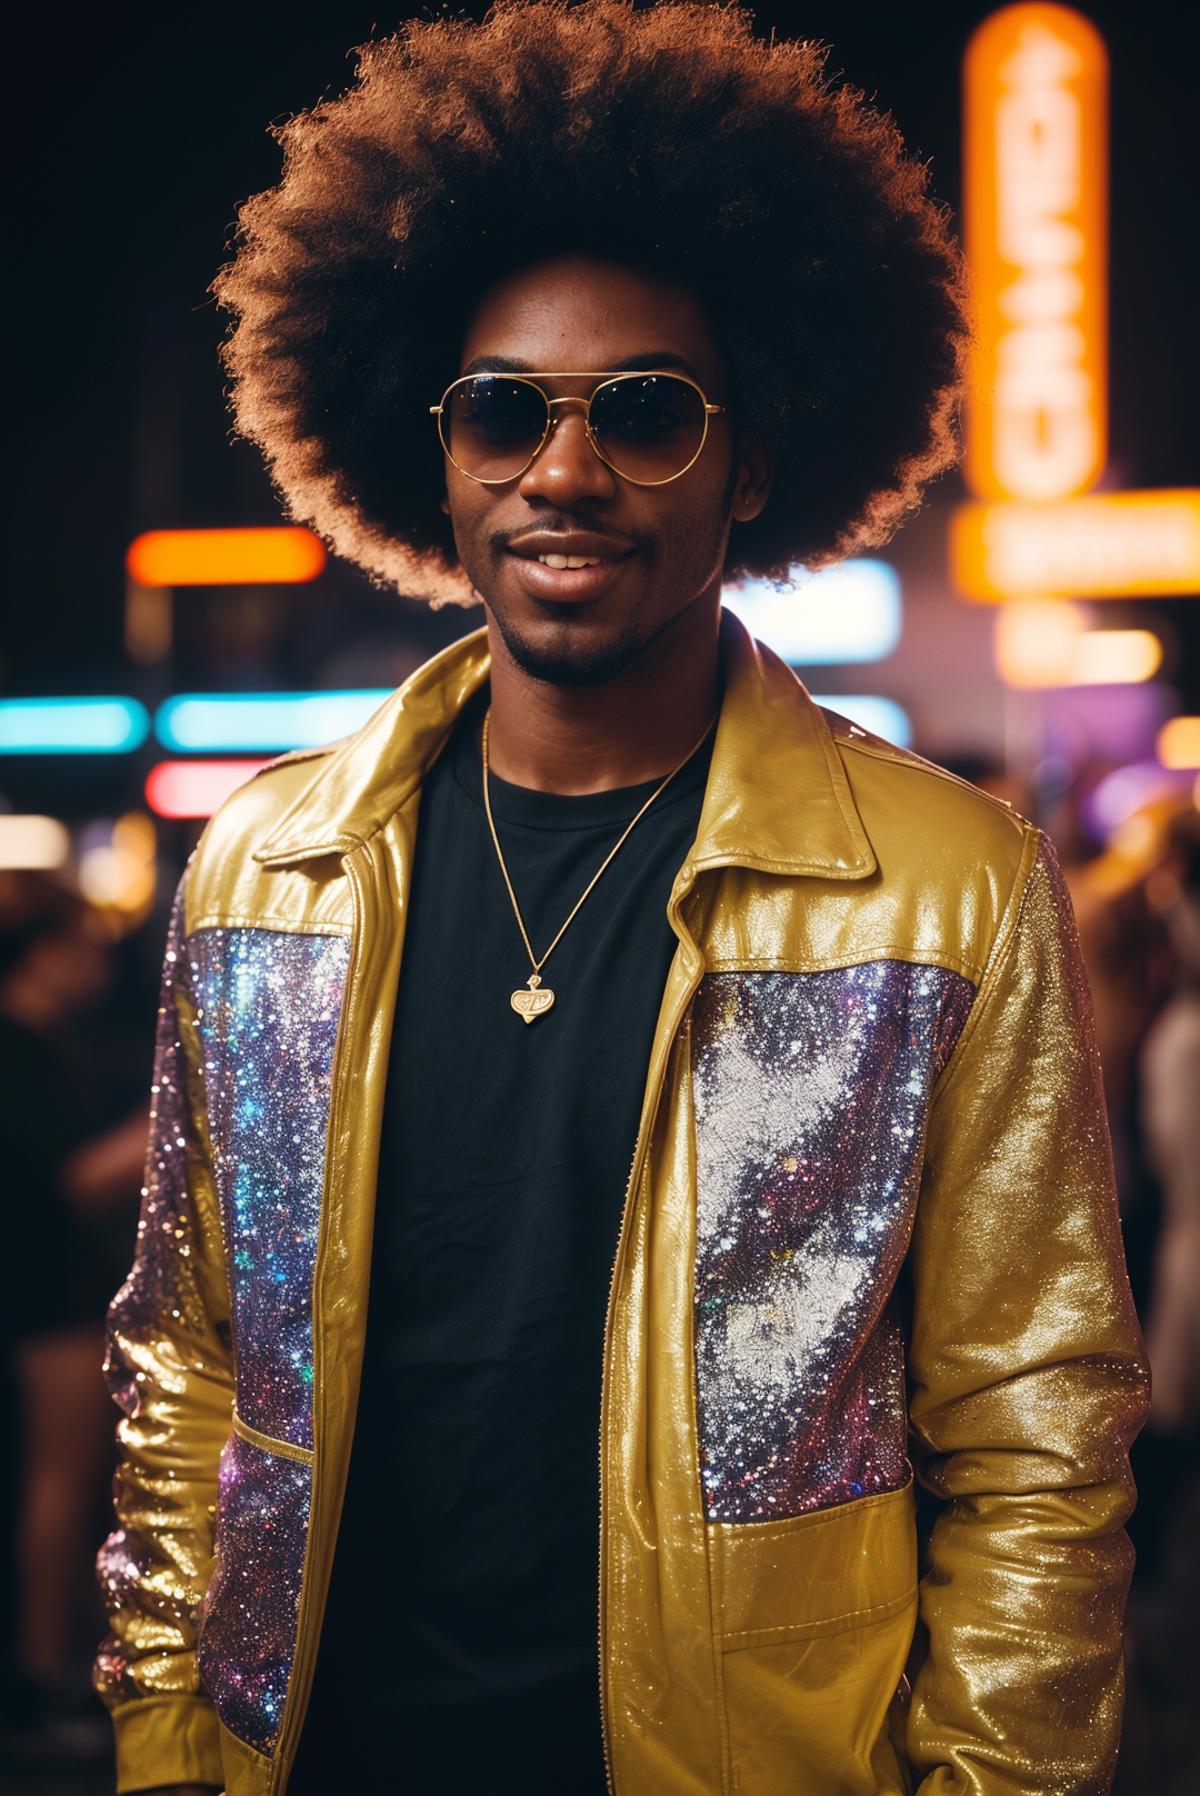 A man wearing a gold jacket and sunglasses.